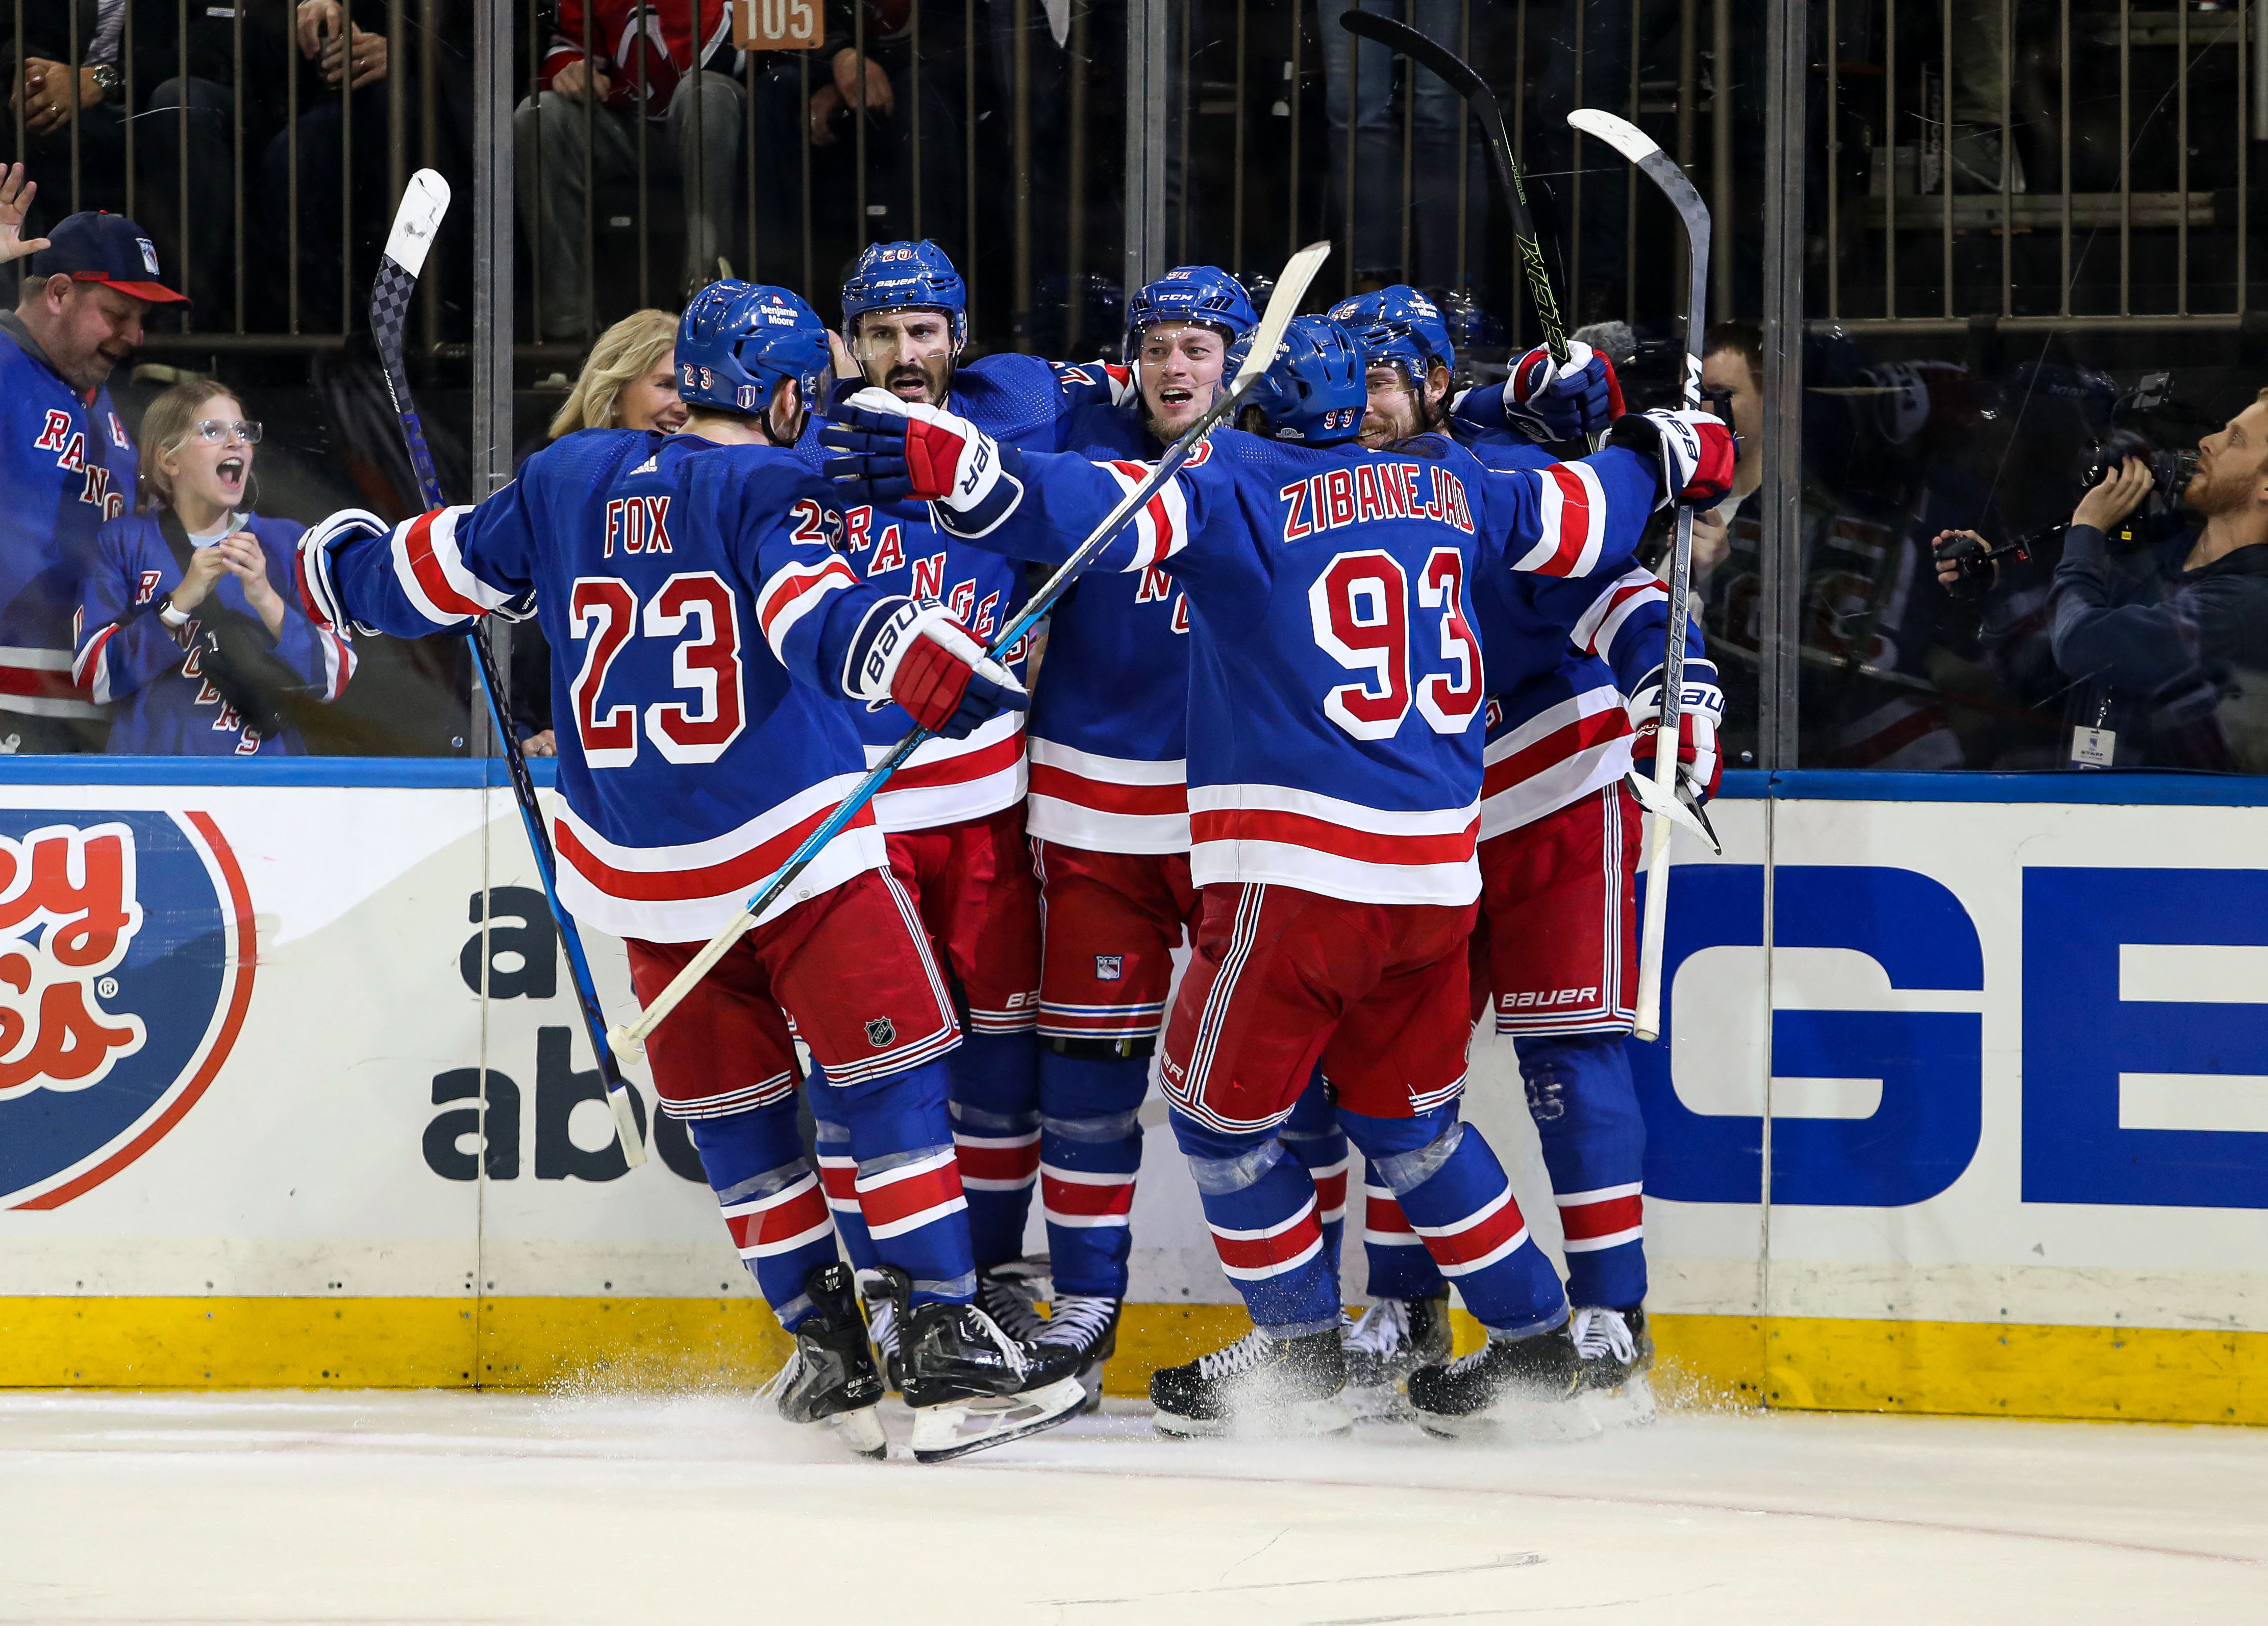 Rangers score 5 straight goals in Game 6, force Game 7 vs. Devils